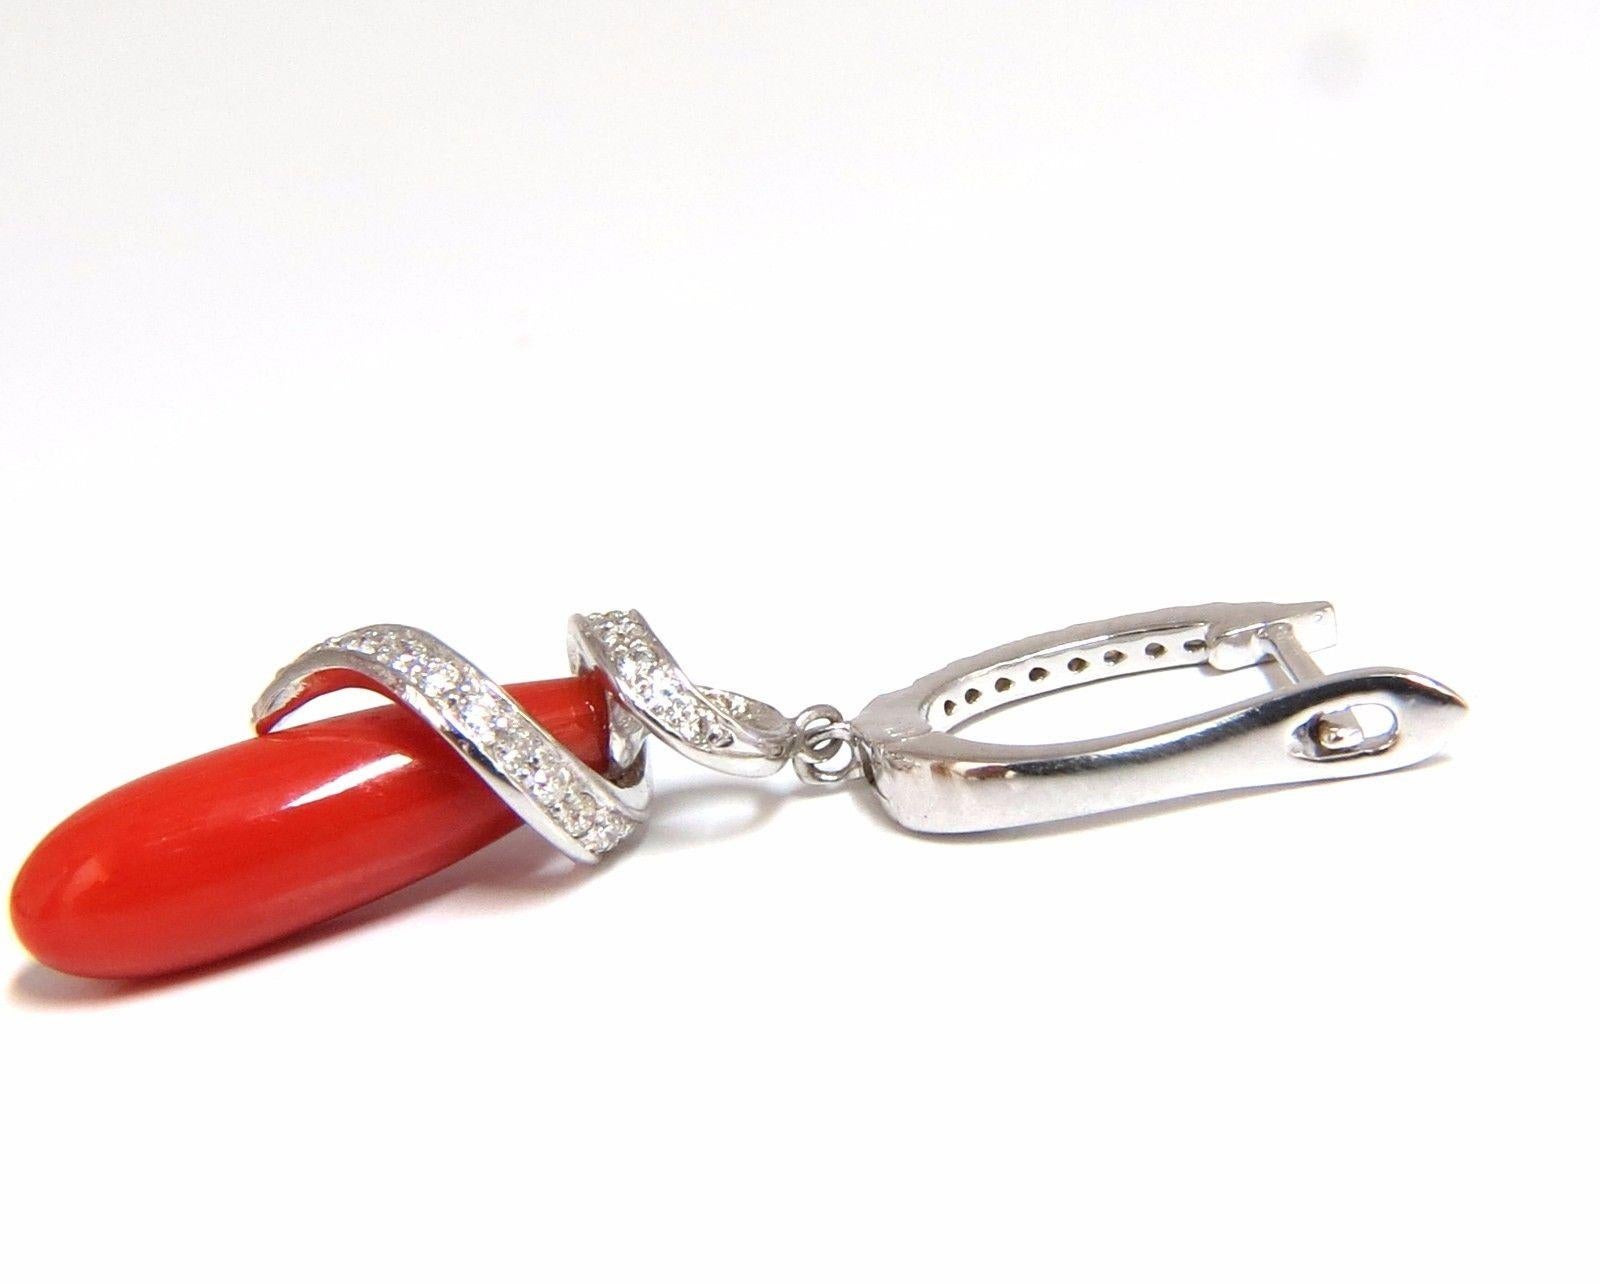 Classic Natural Coral Dangle Form Earrings.

Ox Blood Prime

17 X 5.5mm

Classic Red Luster

.60ct. Round Brilliant diamonds. 

 Full cuts.

G color Vs-2 clarity. 

Total Earring length: 1.5 inch long

 6 grams.

14kt. white gold.

$4000 appraisal